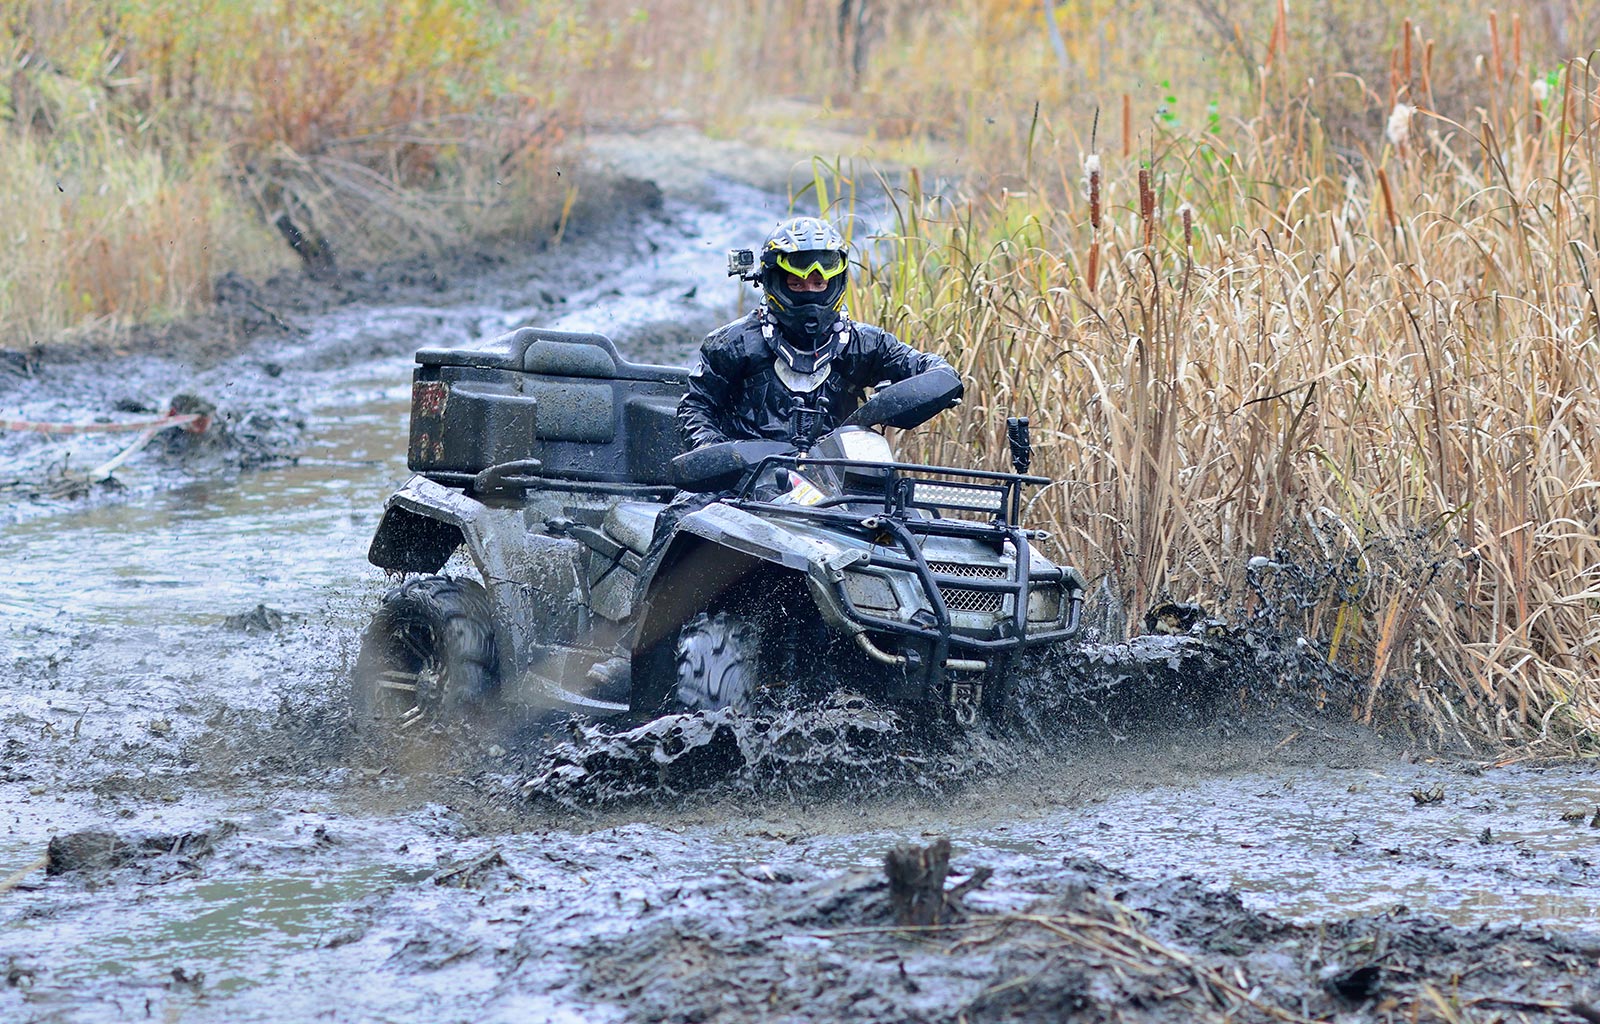 ARE YOUR ATVs WINTERPROOFED?